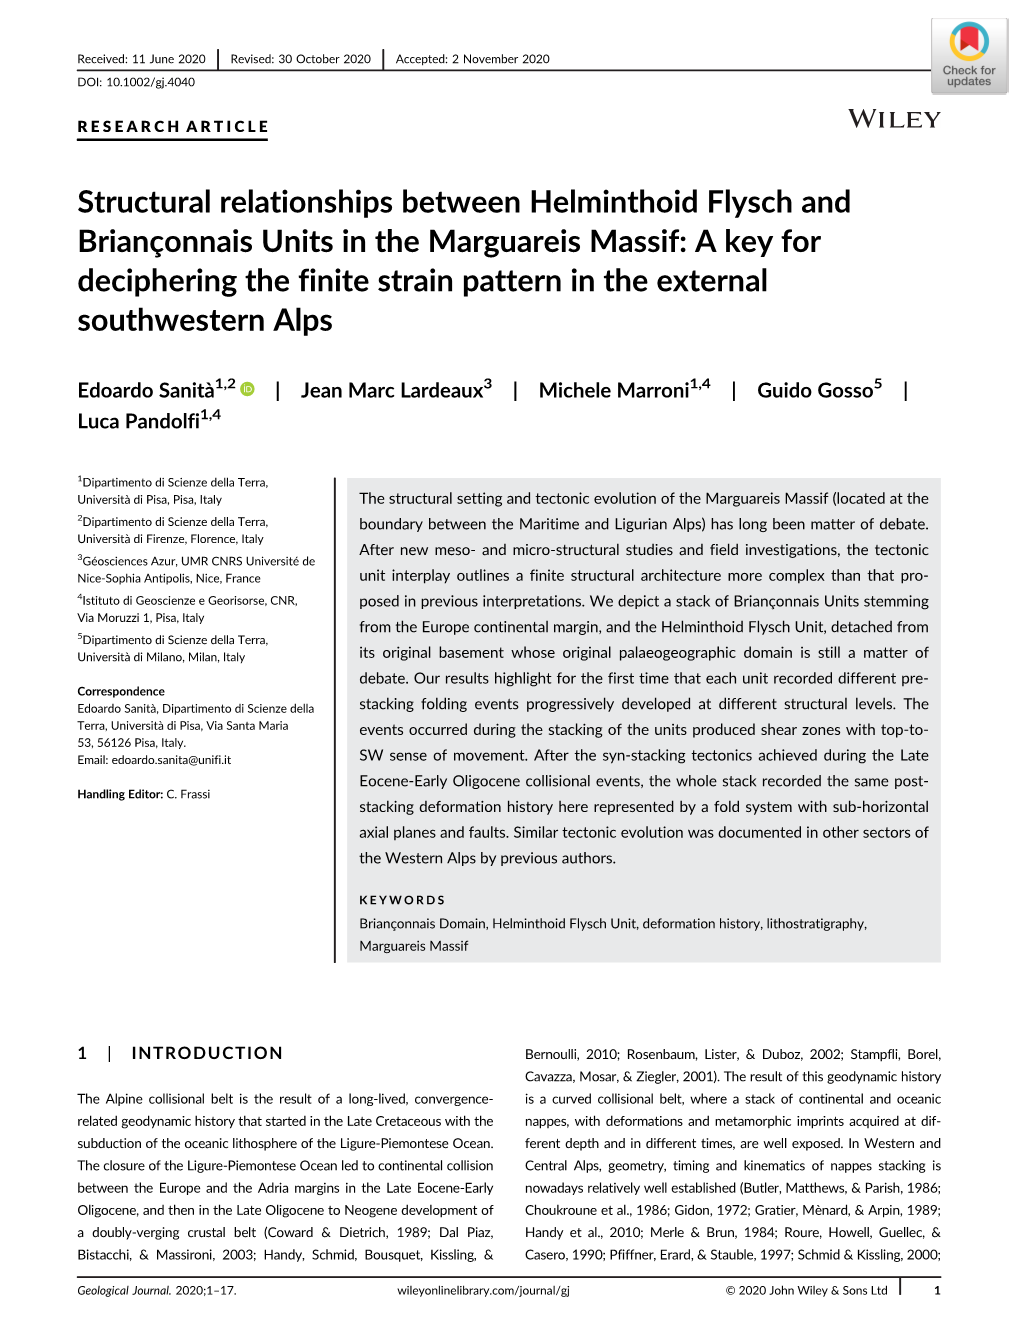 Structural Relationships Between Helminthoid